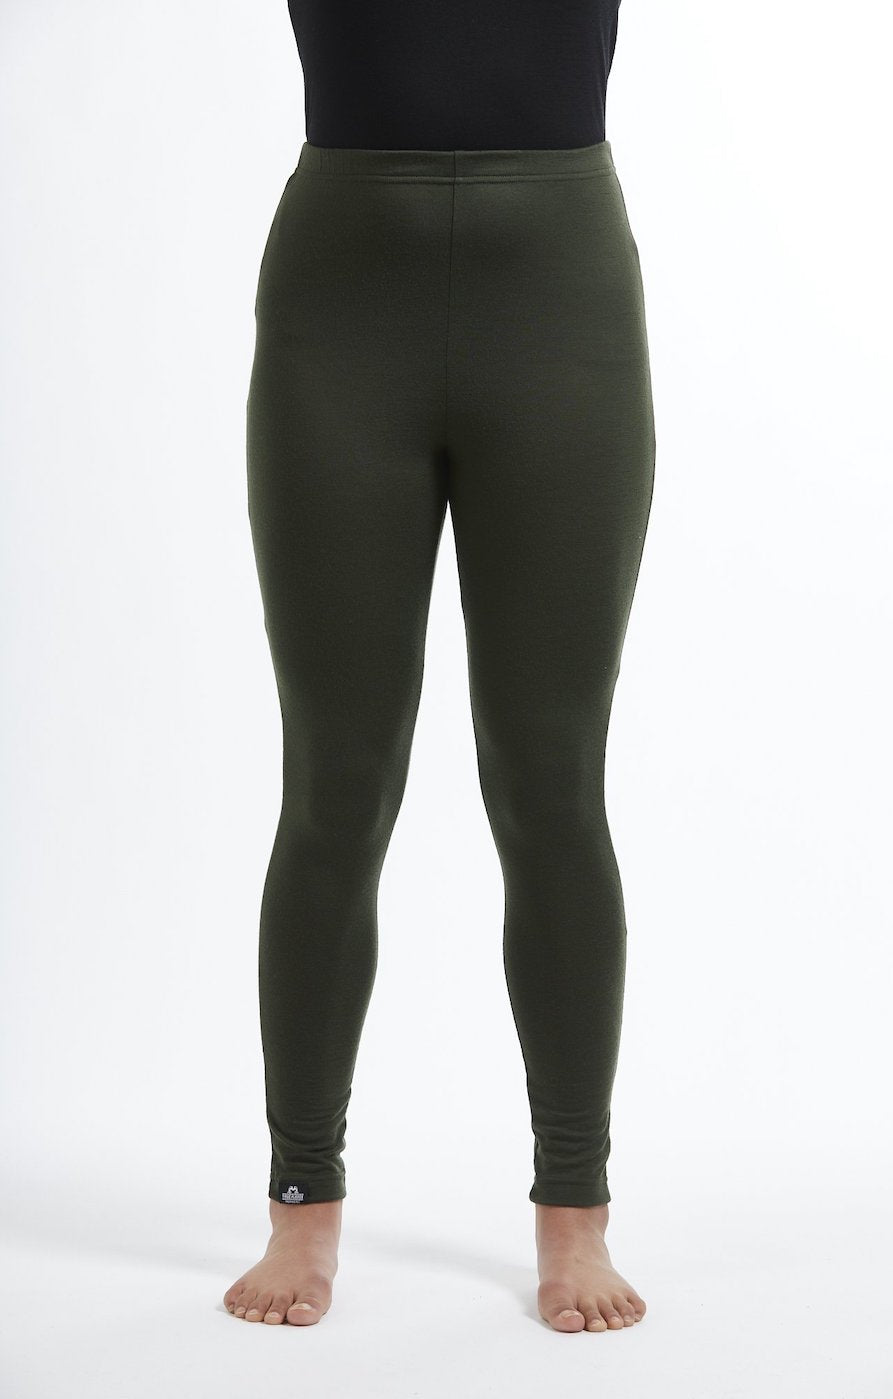 Are Compression Leggings Good For Flights To Us